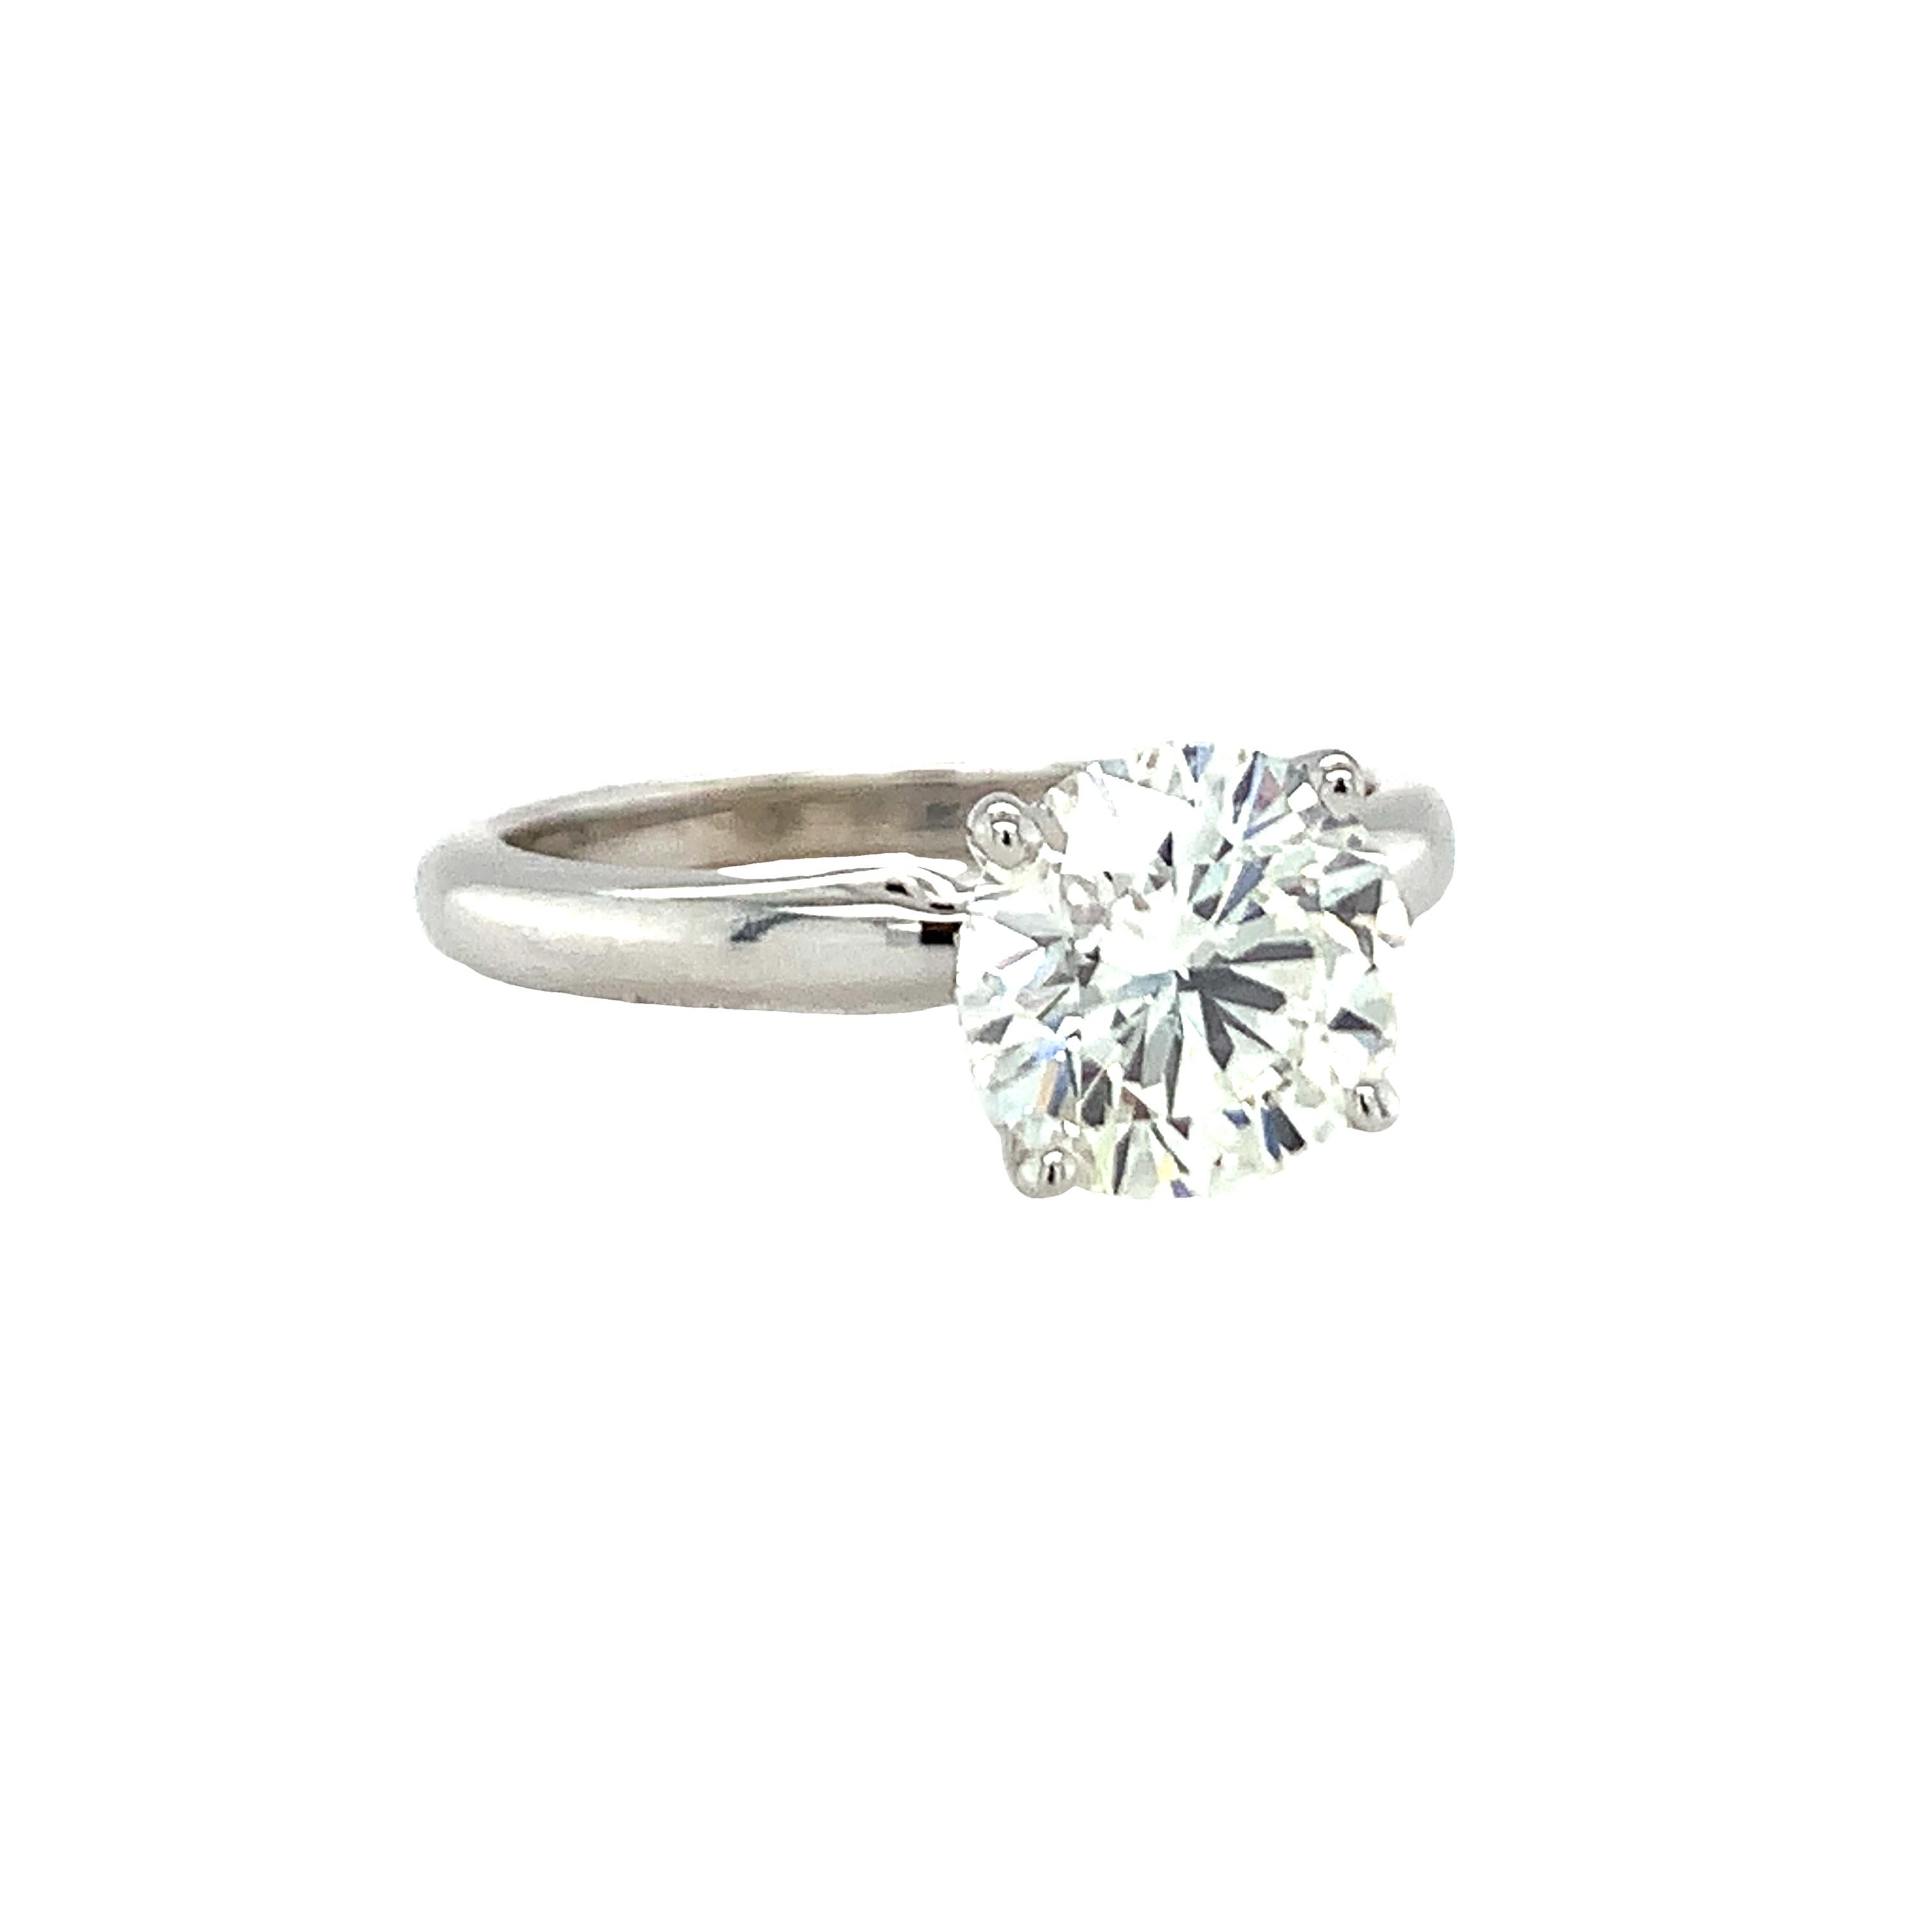 One GIA certified 1.63 ct. diamond engagement ring cast in 14K white gold centering one prong set, round brilliant cut diamond with J color and SI-2 clarity with excellent cut grade and laser inscribed accompanied by GIA Report.

Stunning,